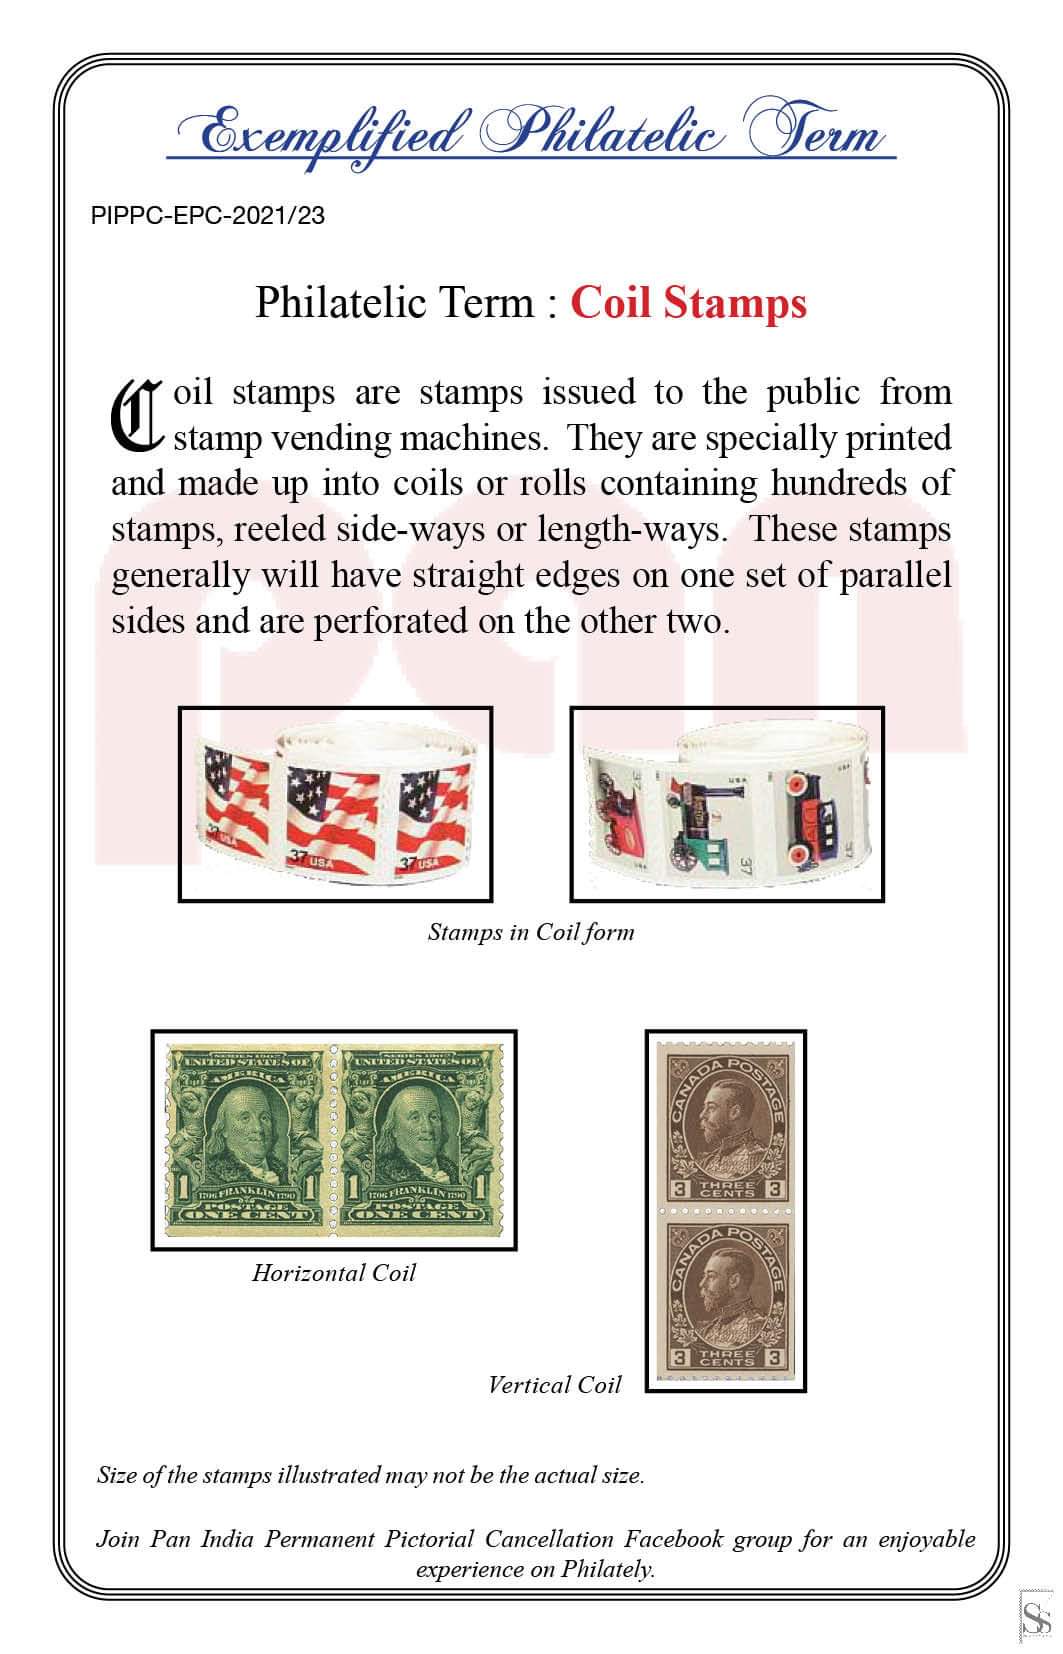 23. Today's Exemplified Philatelic term-Coil Stamps